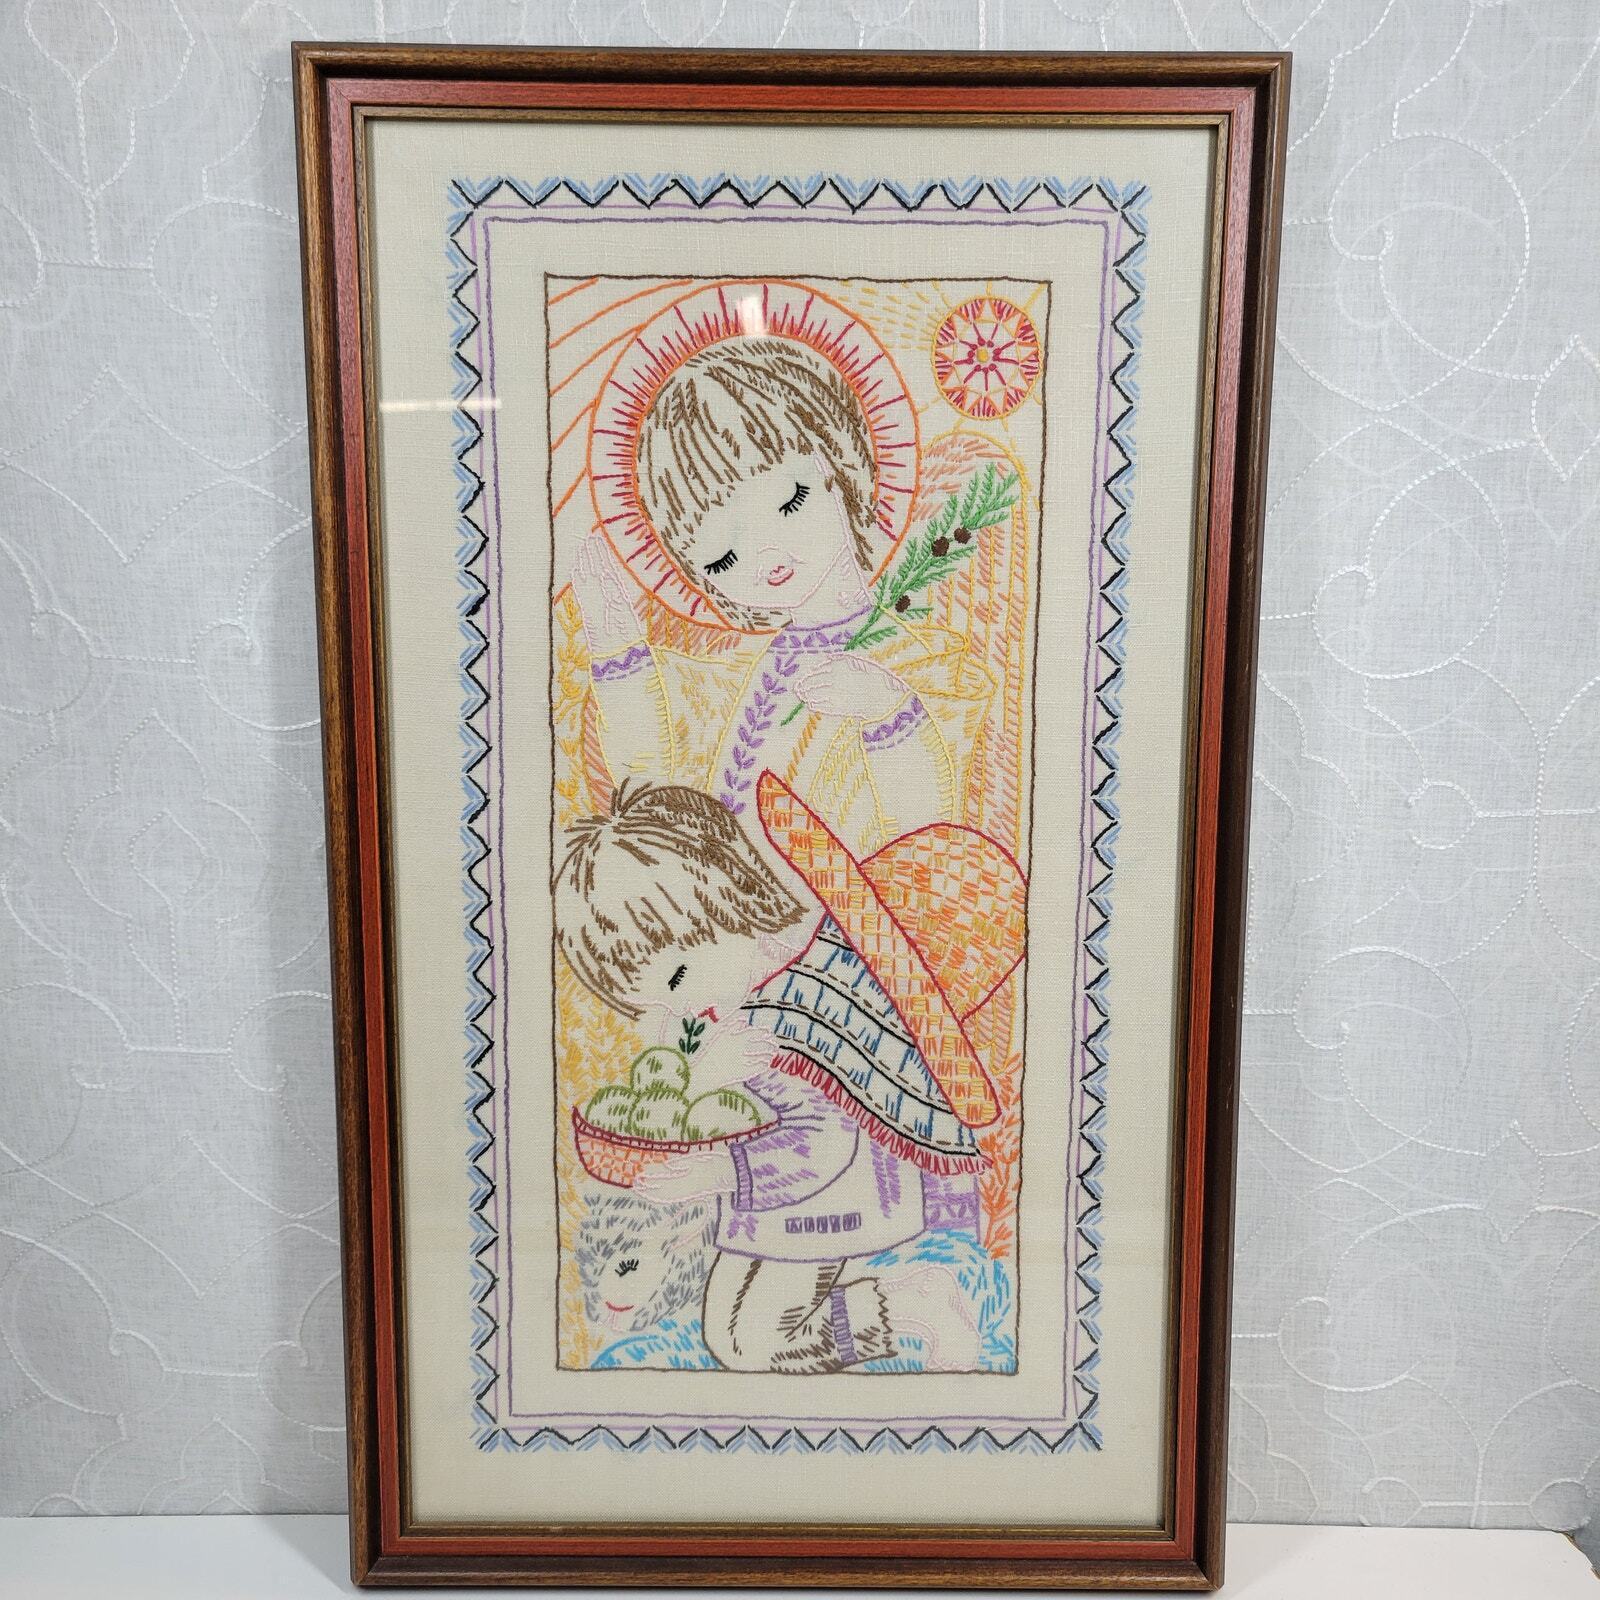 VINTAGE Finished Embroidery Religious Childrens Praying Kneeled Down Framed